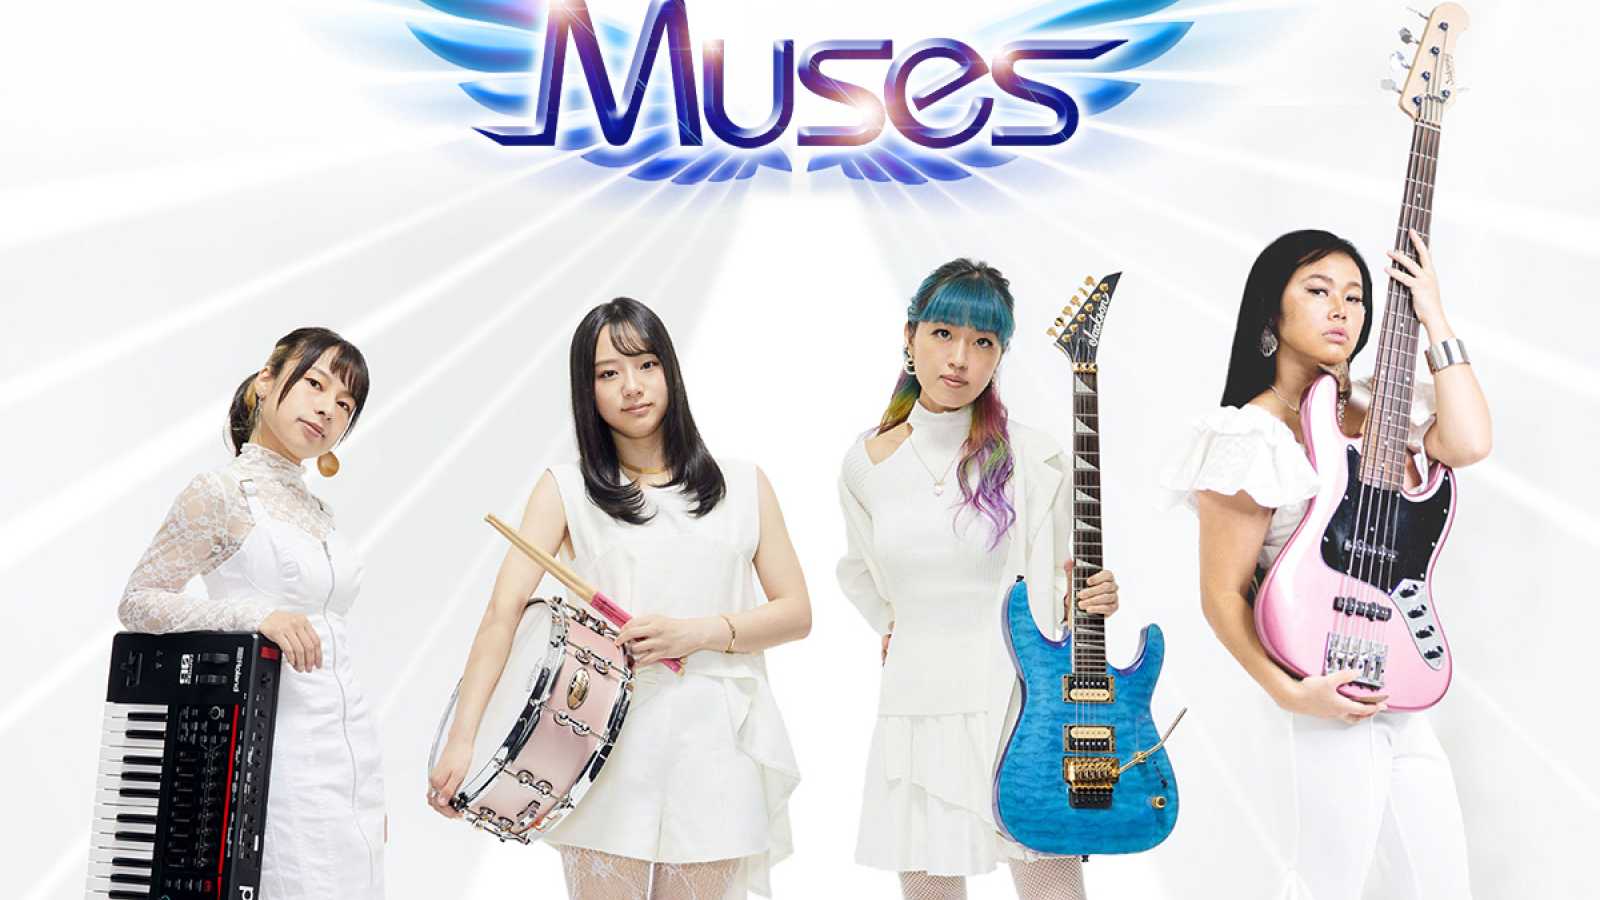 Muses © Poppin Records. All rights reserved.